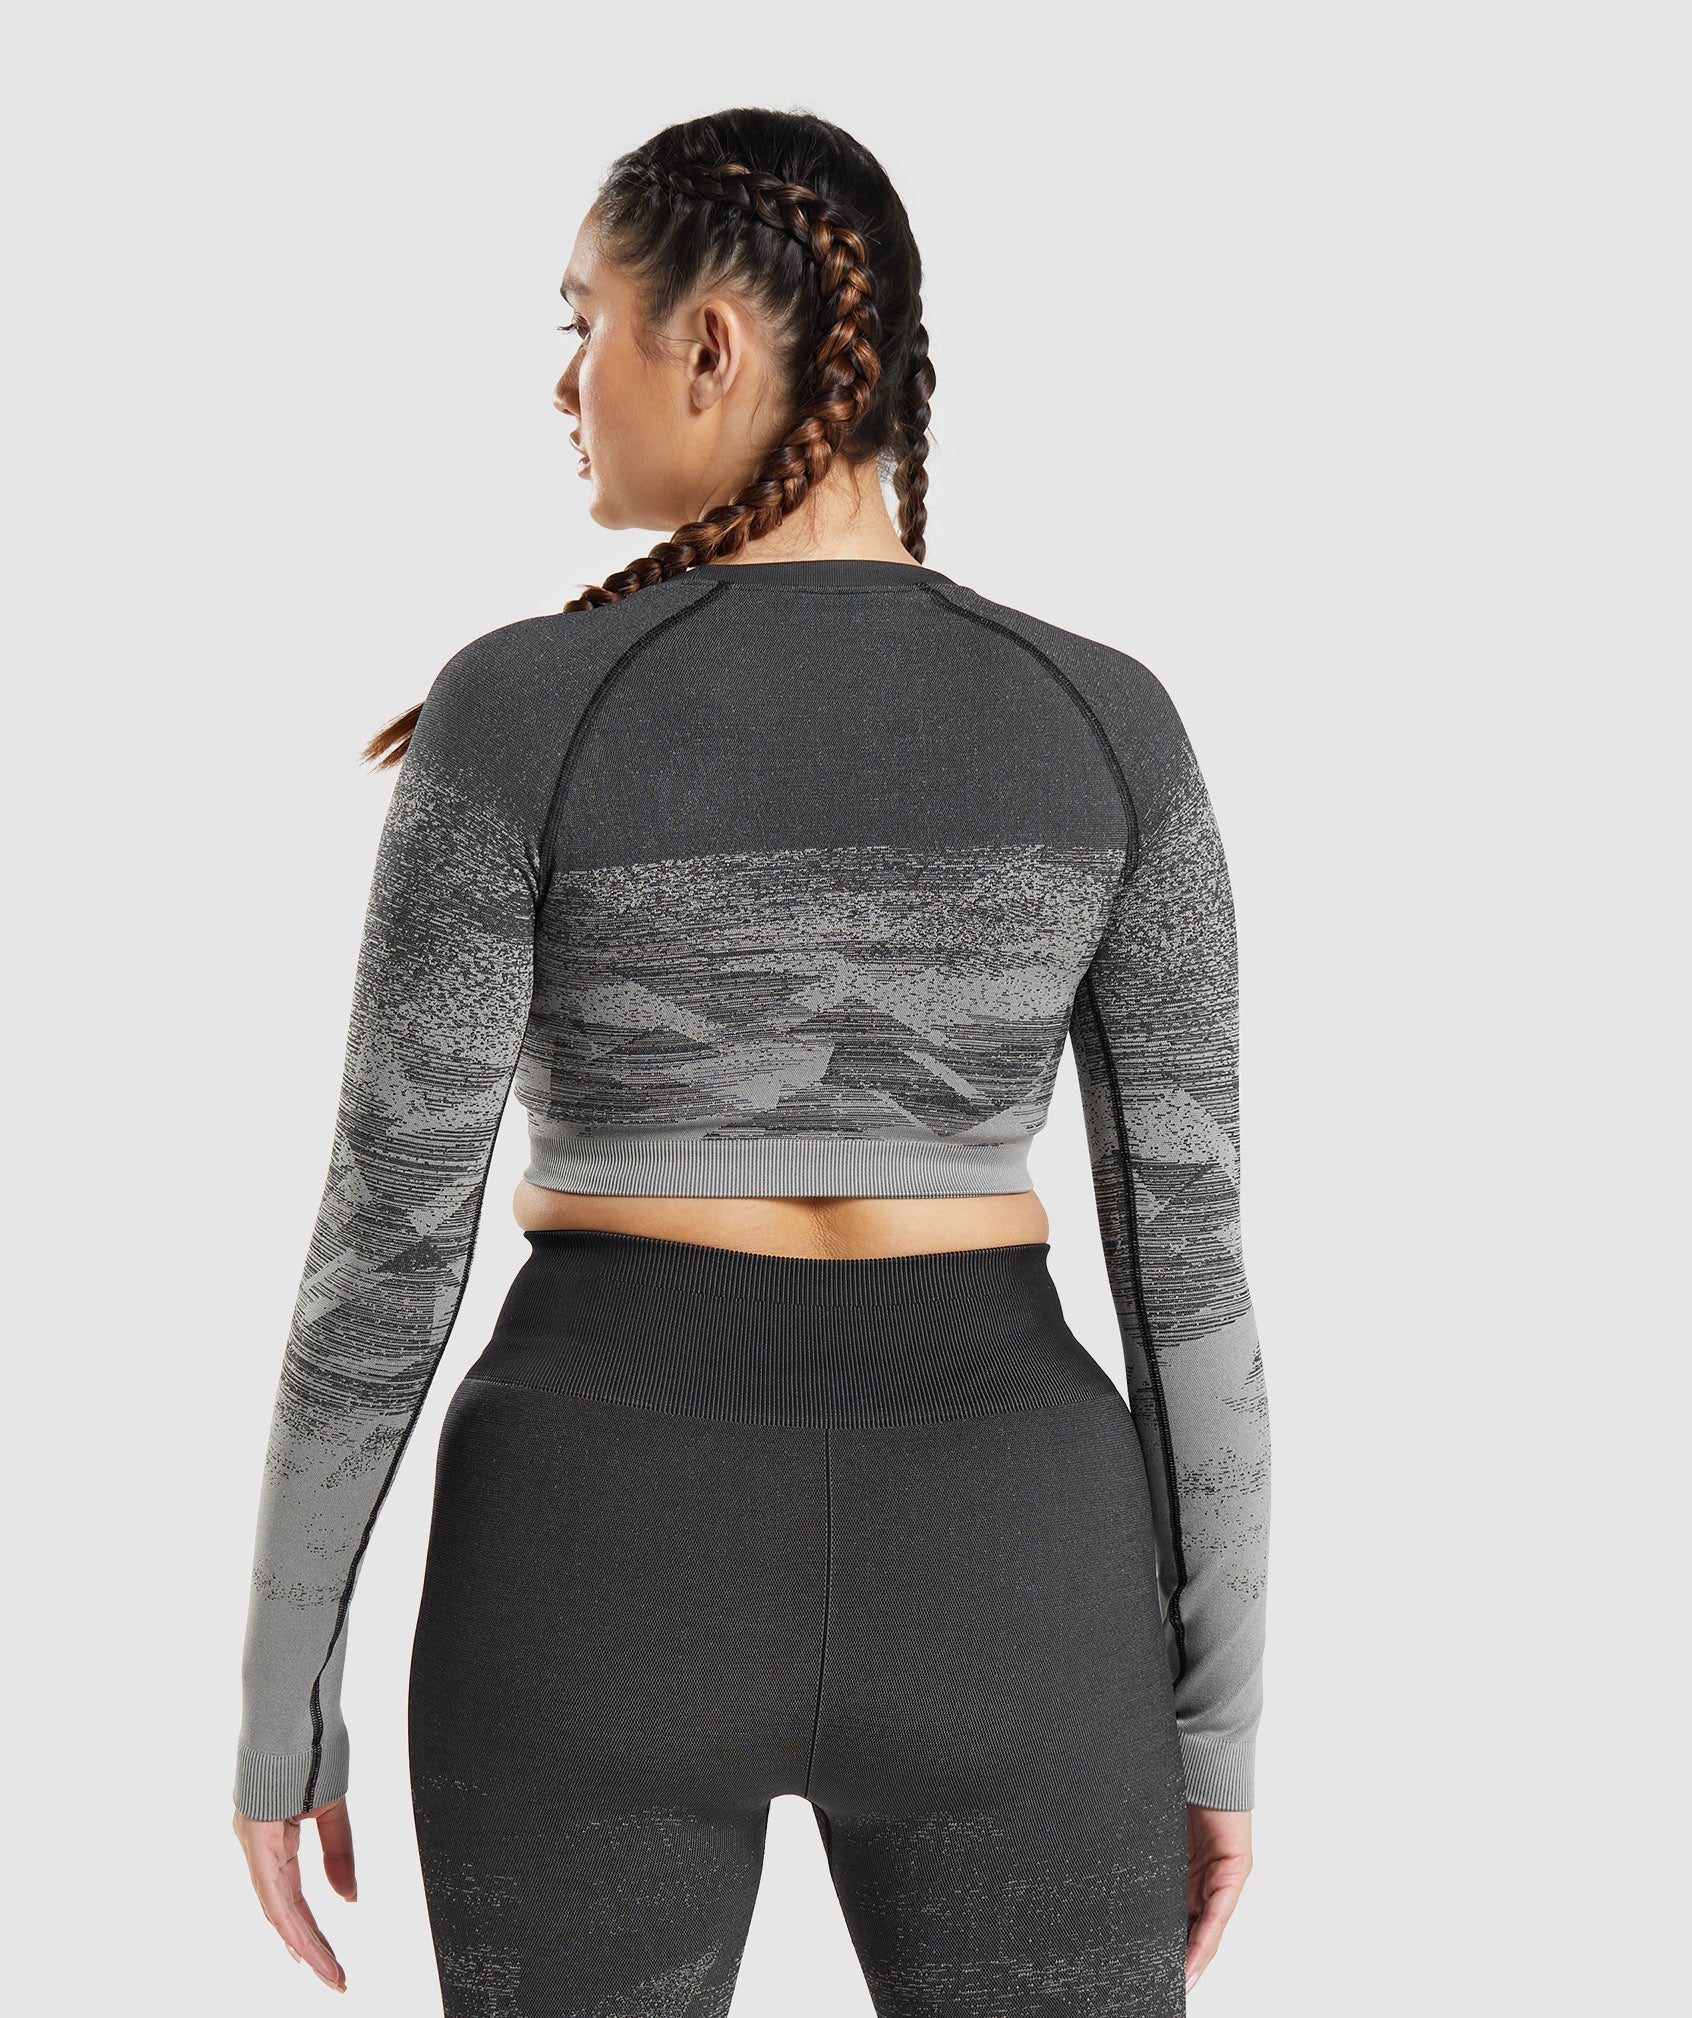 Gymshark Adapt Ombre Seamless Long Sleeve Crop Top - $30 - From beautiful